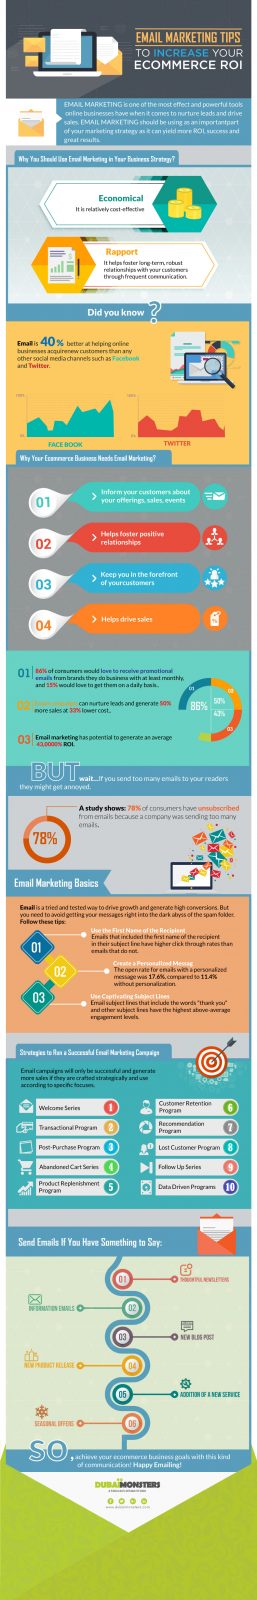 Email Marketing Tips to Increase Your Ecommerce ROI [Infographic]